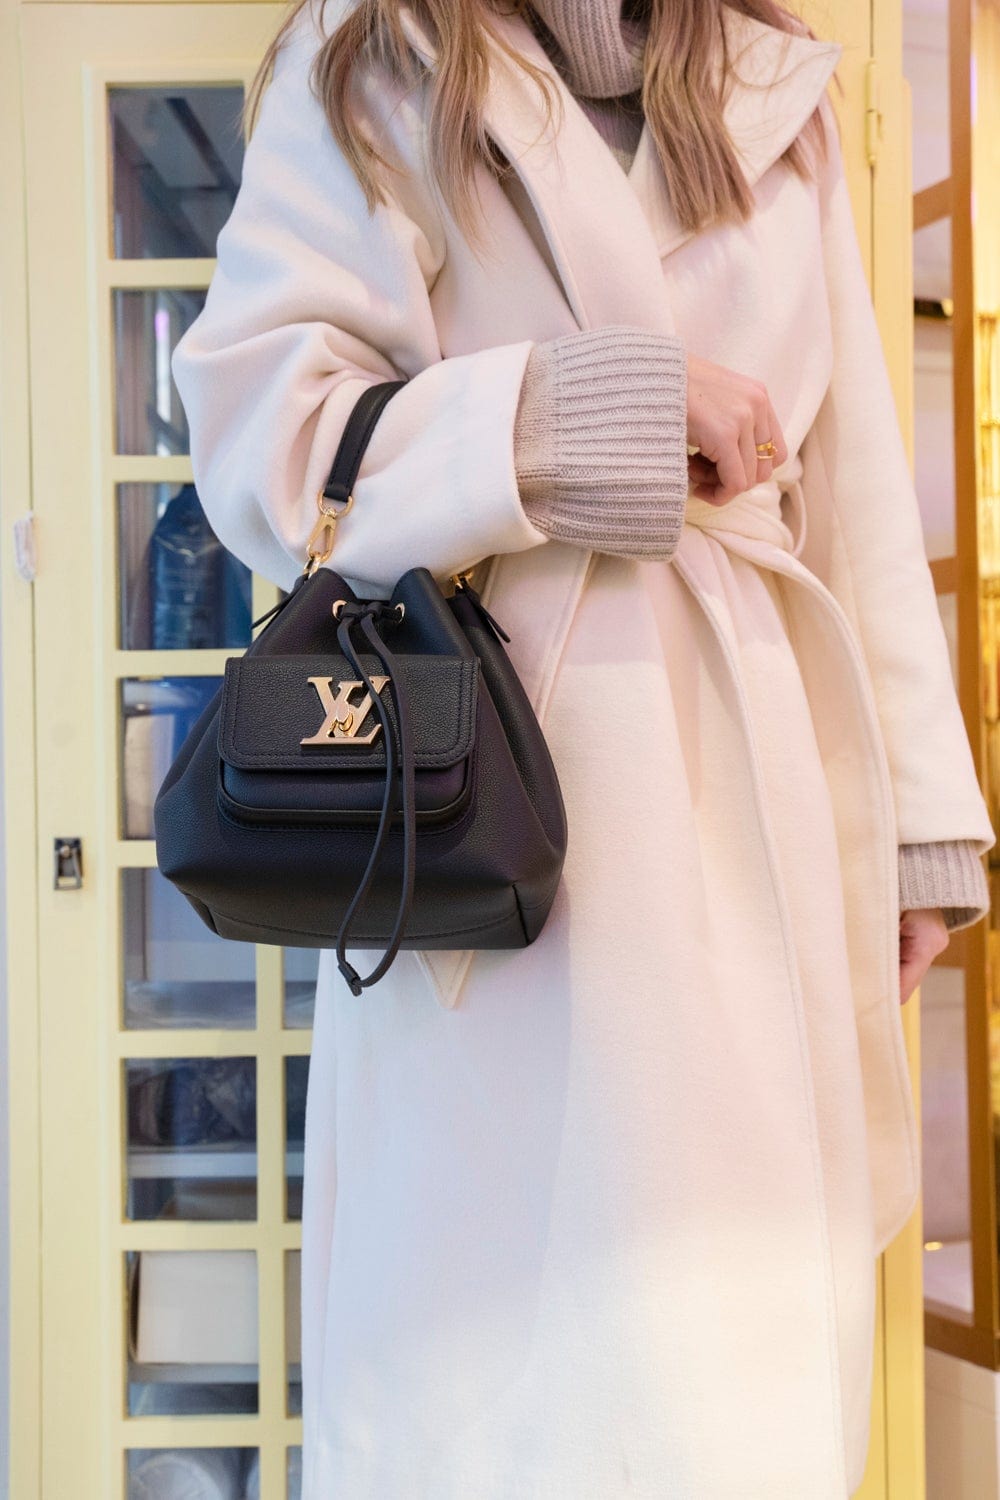 Changing out my Louis Vuitton Bags: What fits inside the LV Lockme Bucket  Bag? 